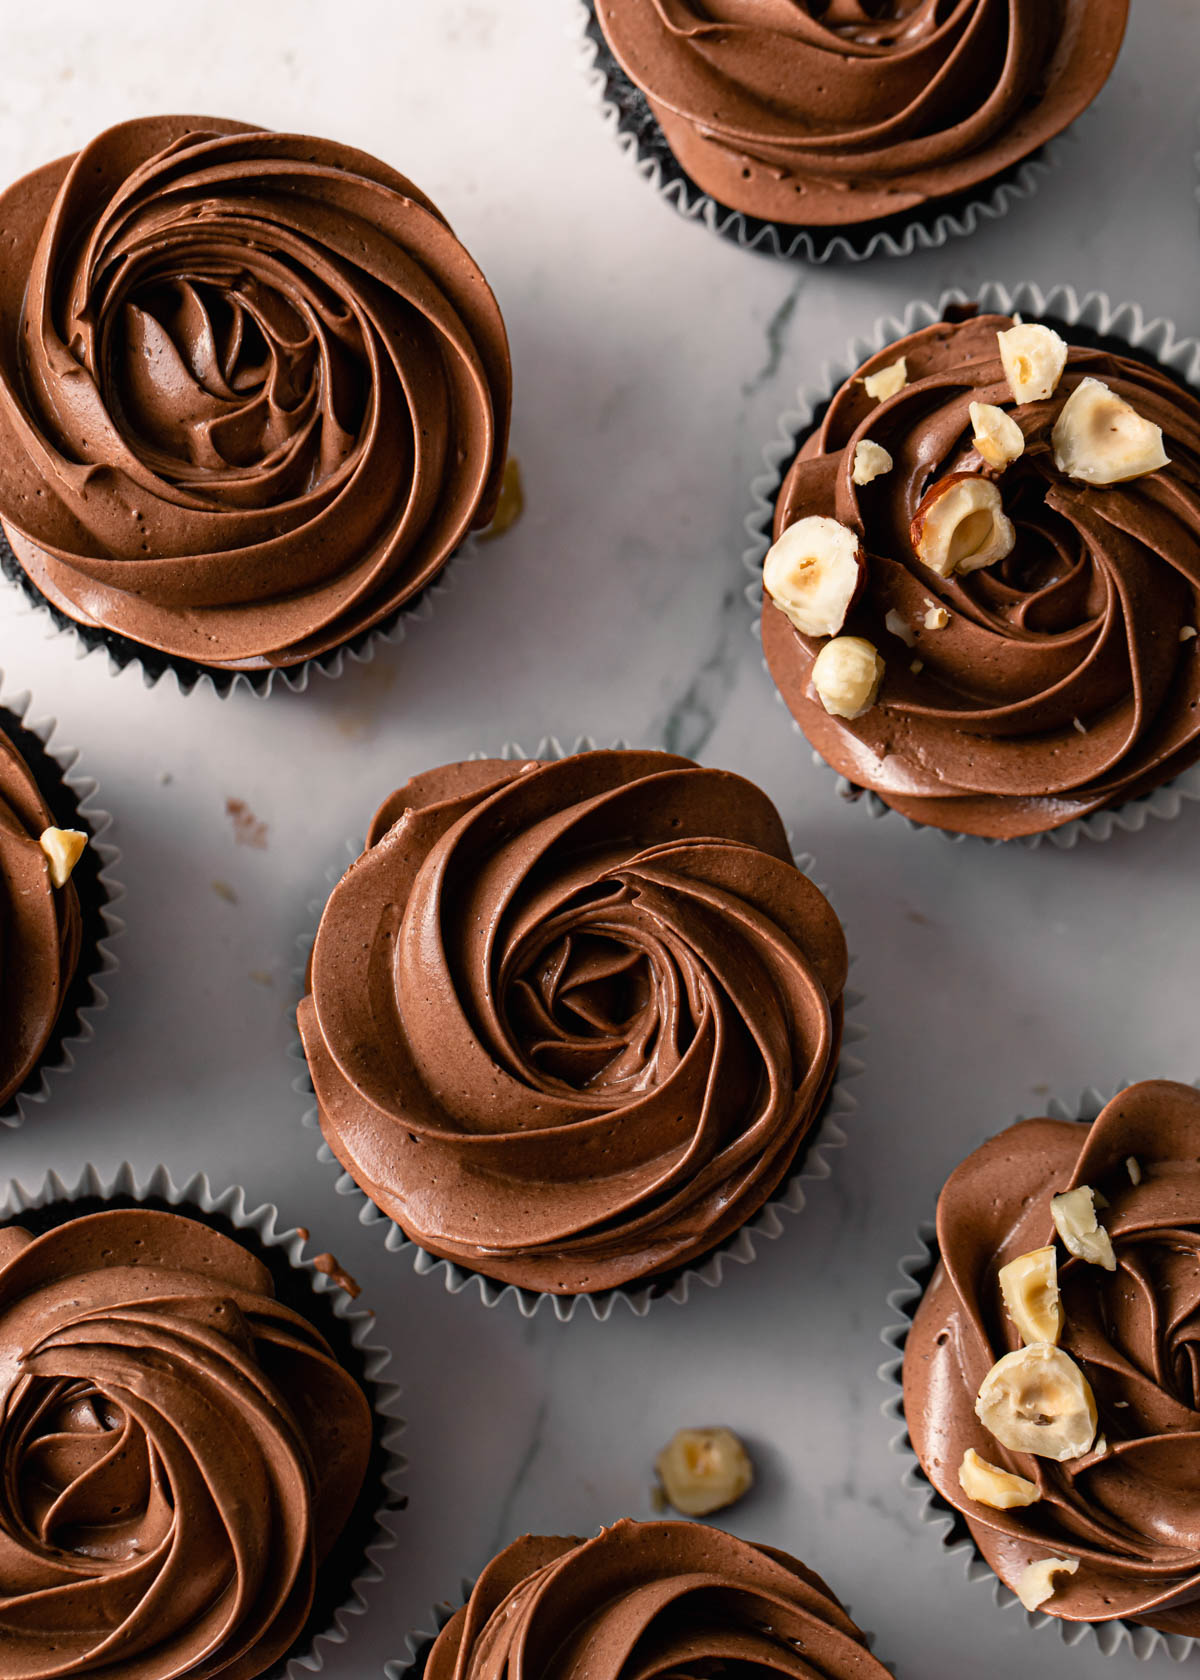 An overhead image of chocolate cupcakes with swirls of Nutella buttercream